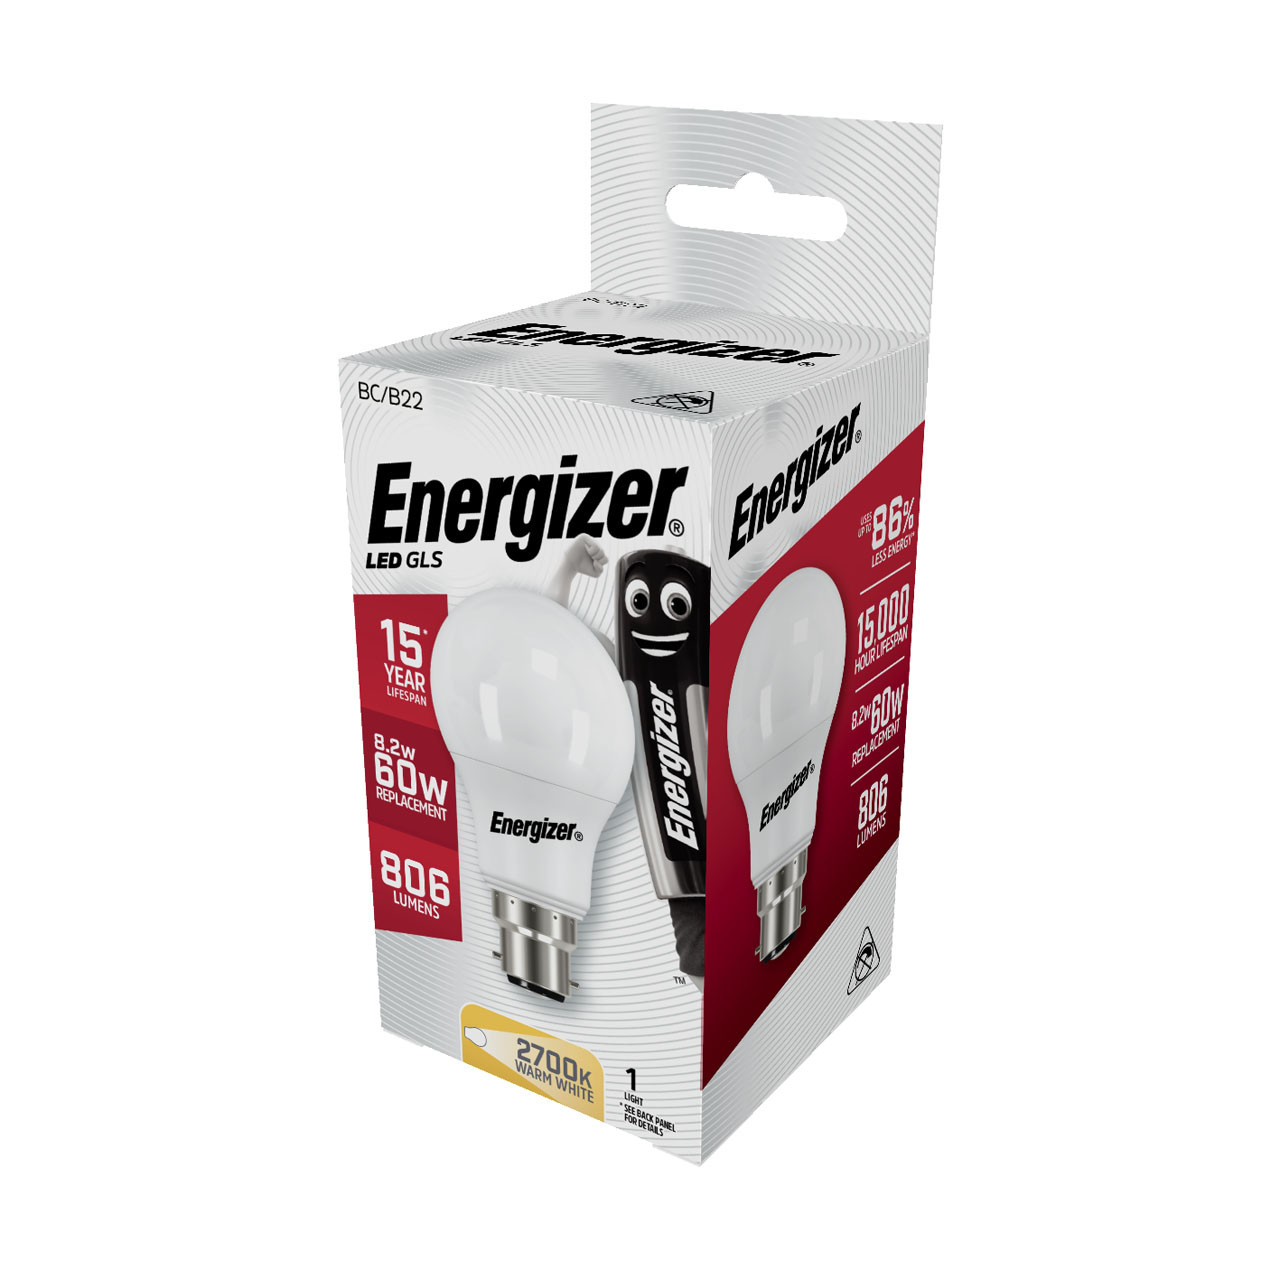 Photograph of Energizer S8862 8.2W LED GLS 806Lm Opal B22 Warm White